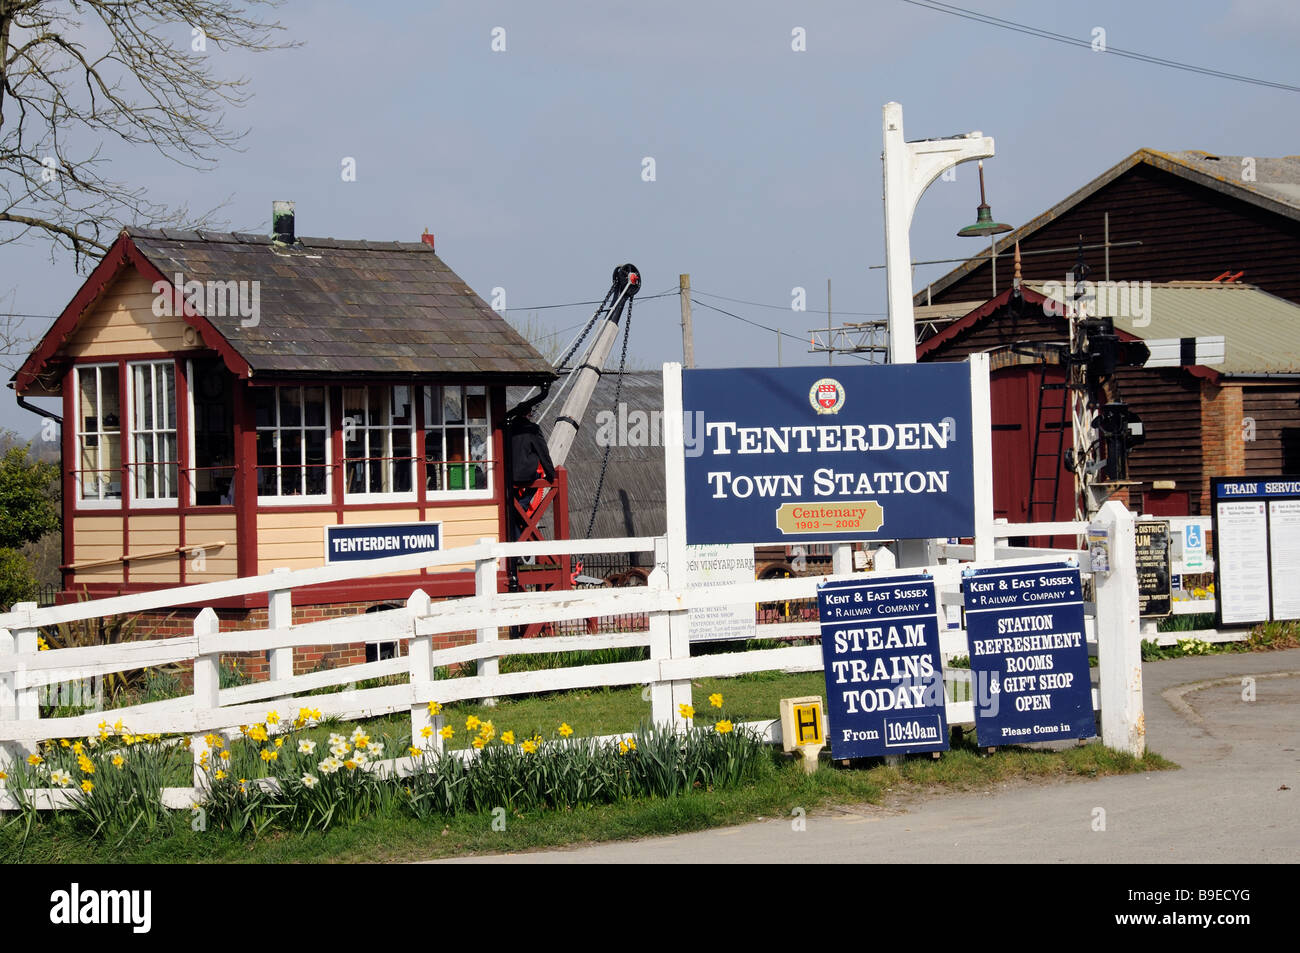 Kent East Sussex Railway Tenterden Town Station East Sussex England Regno Unito Foto Stock